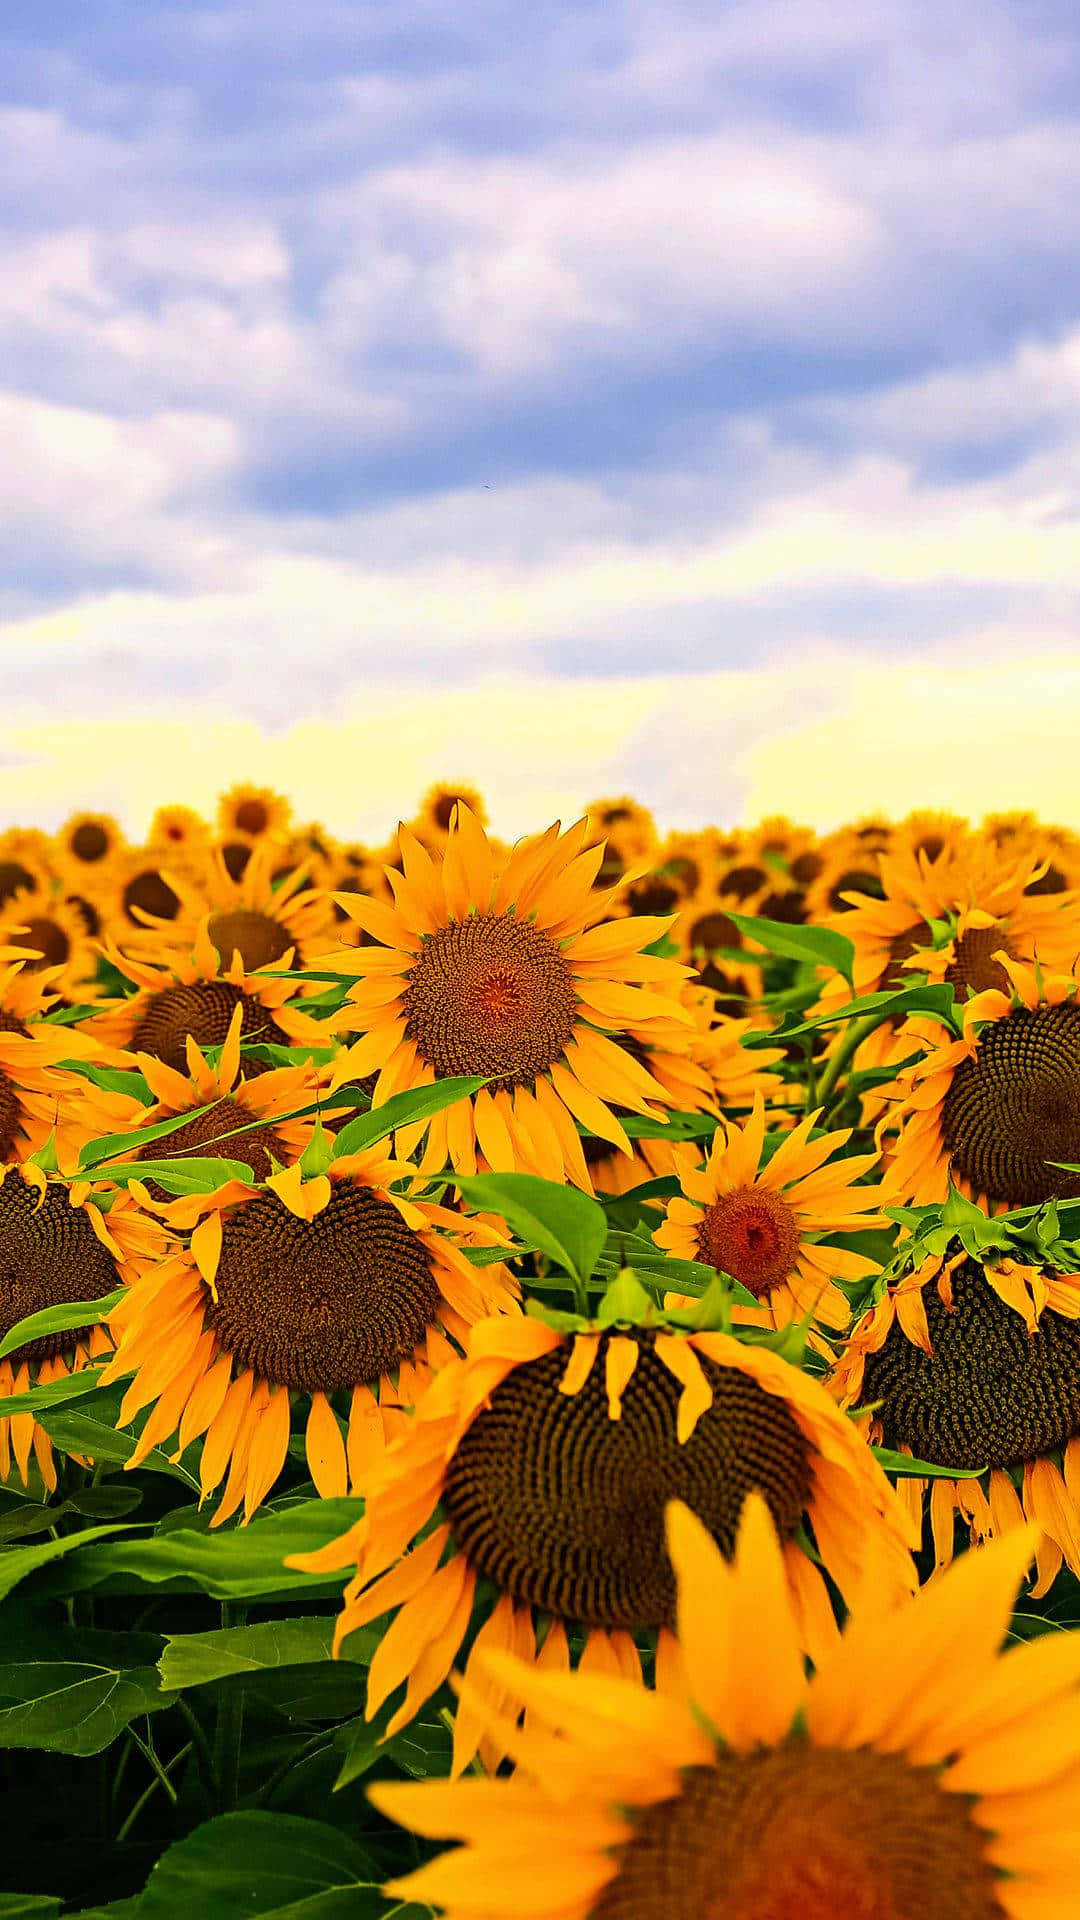 Cloudy Sky With Sunflower Aesthetic Iphone Wallpaper